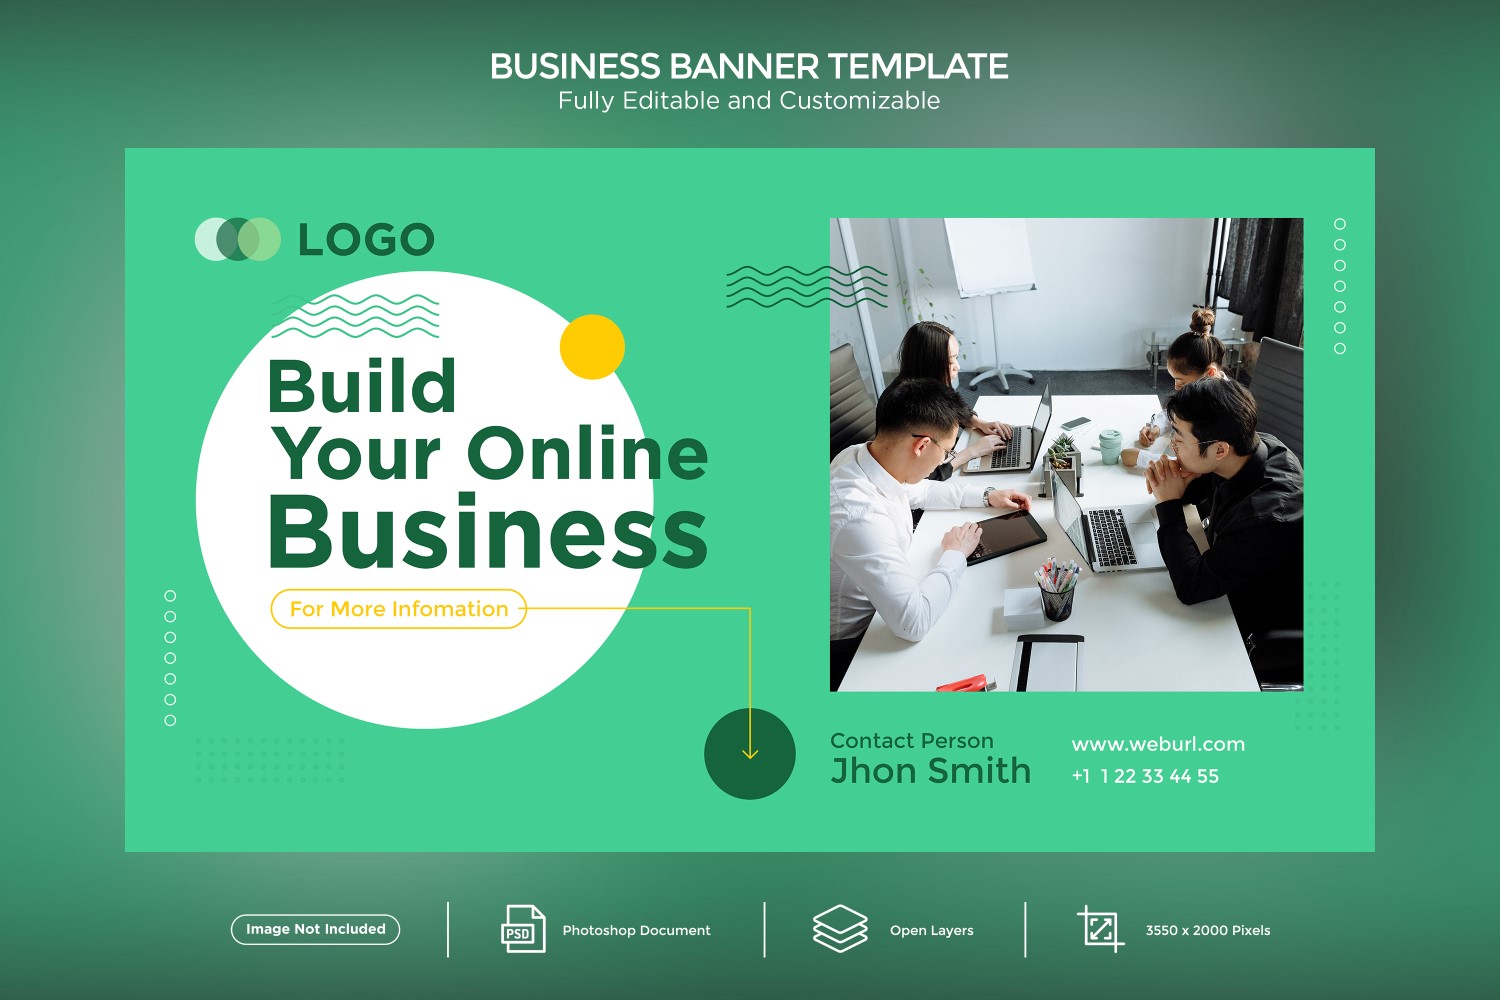 Build Your Online Business Team work Banner Design Template green themes